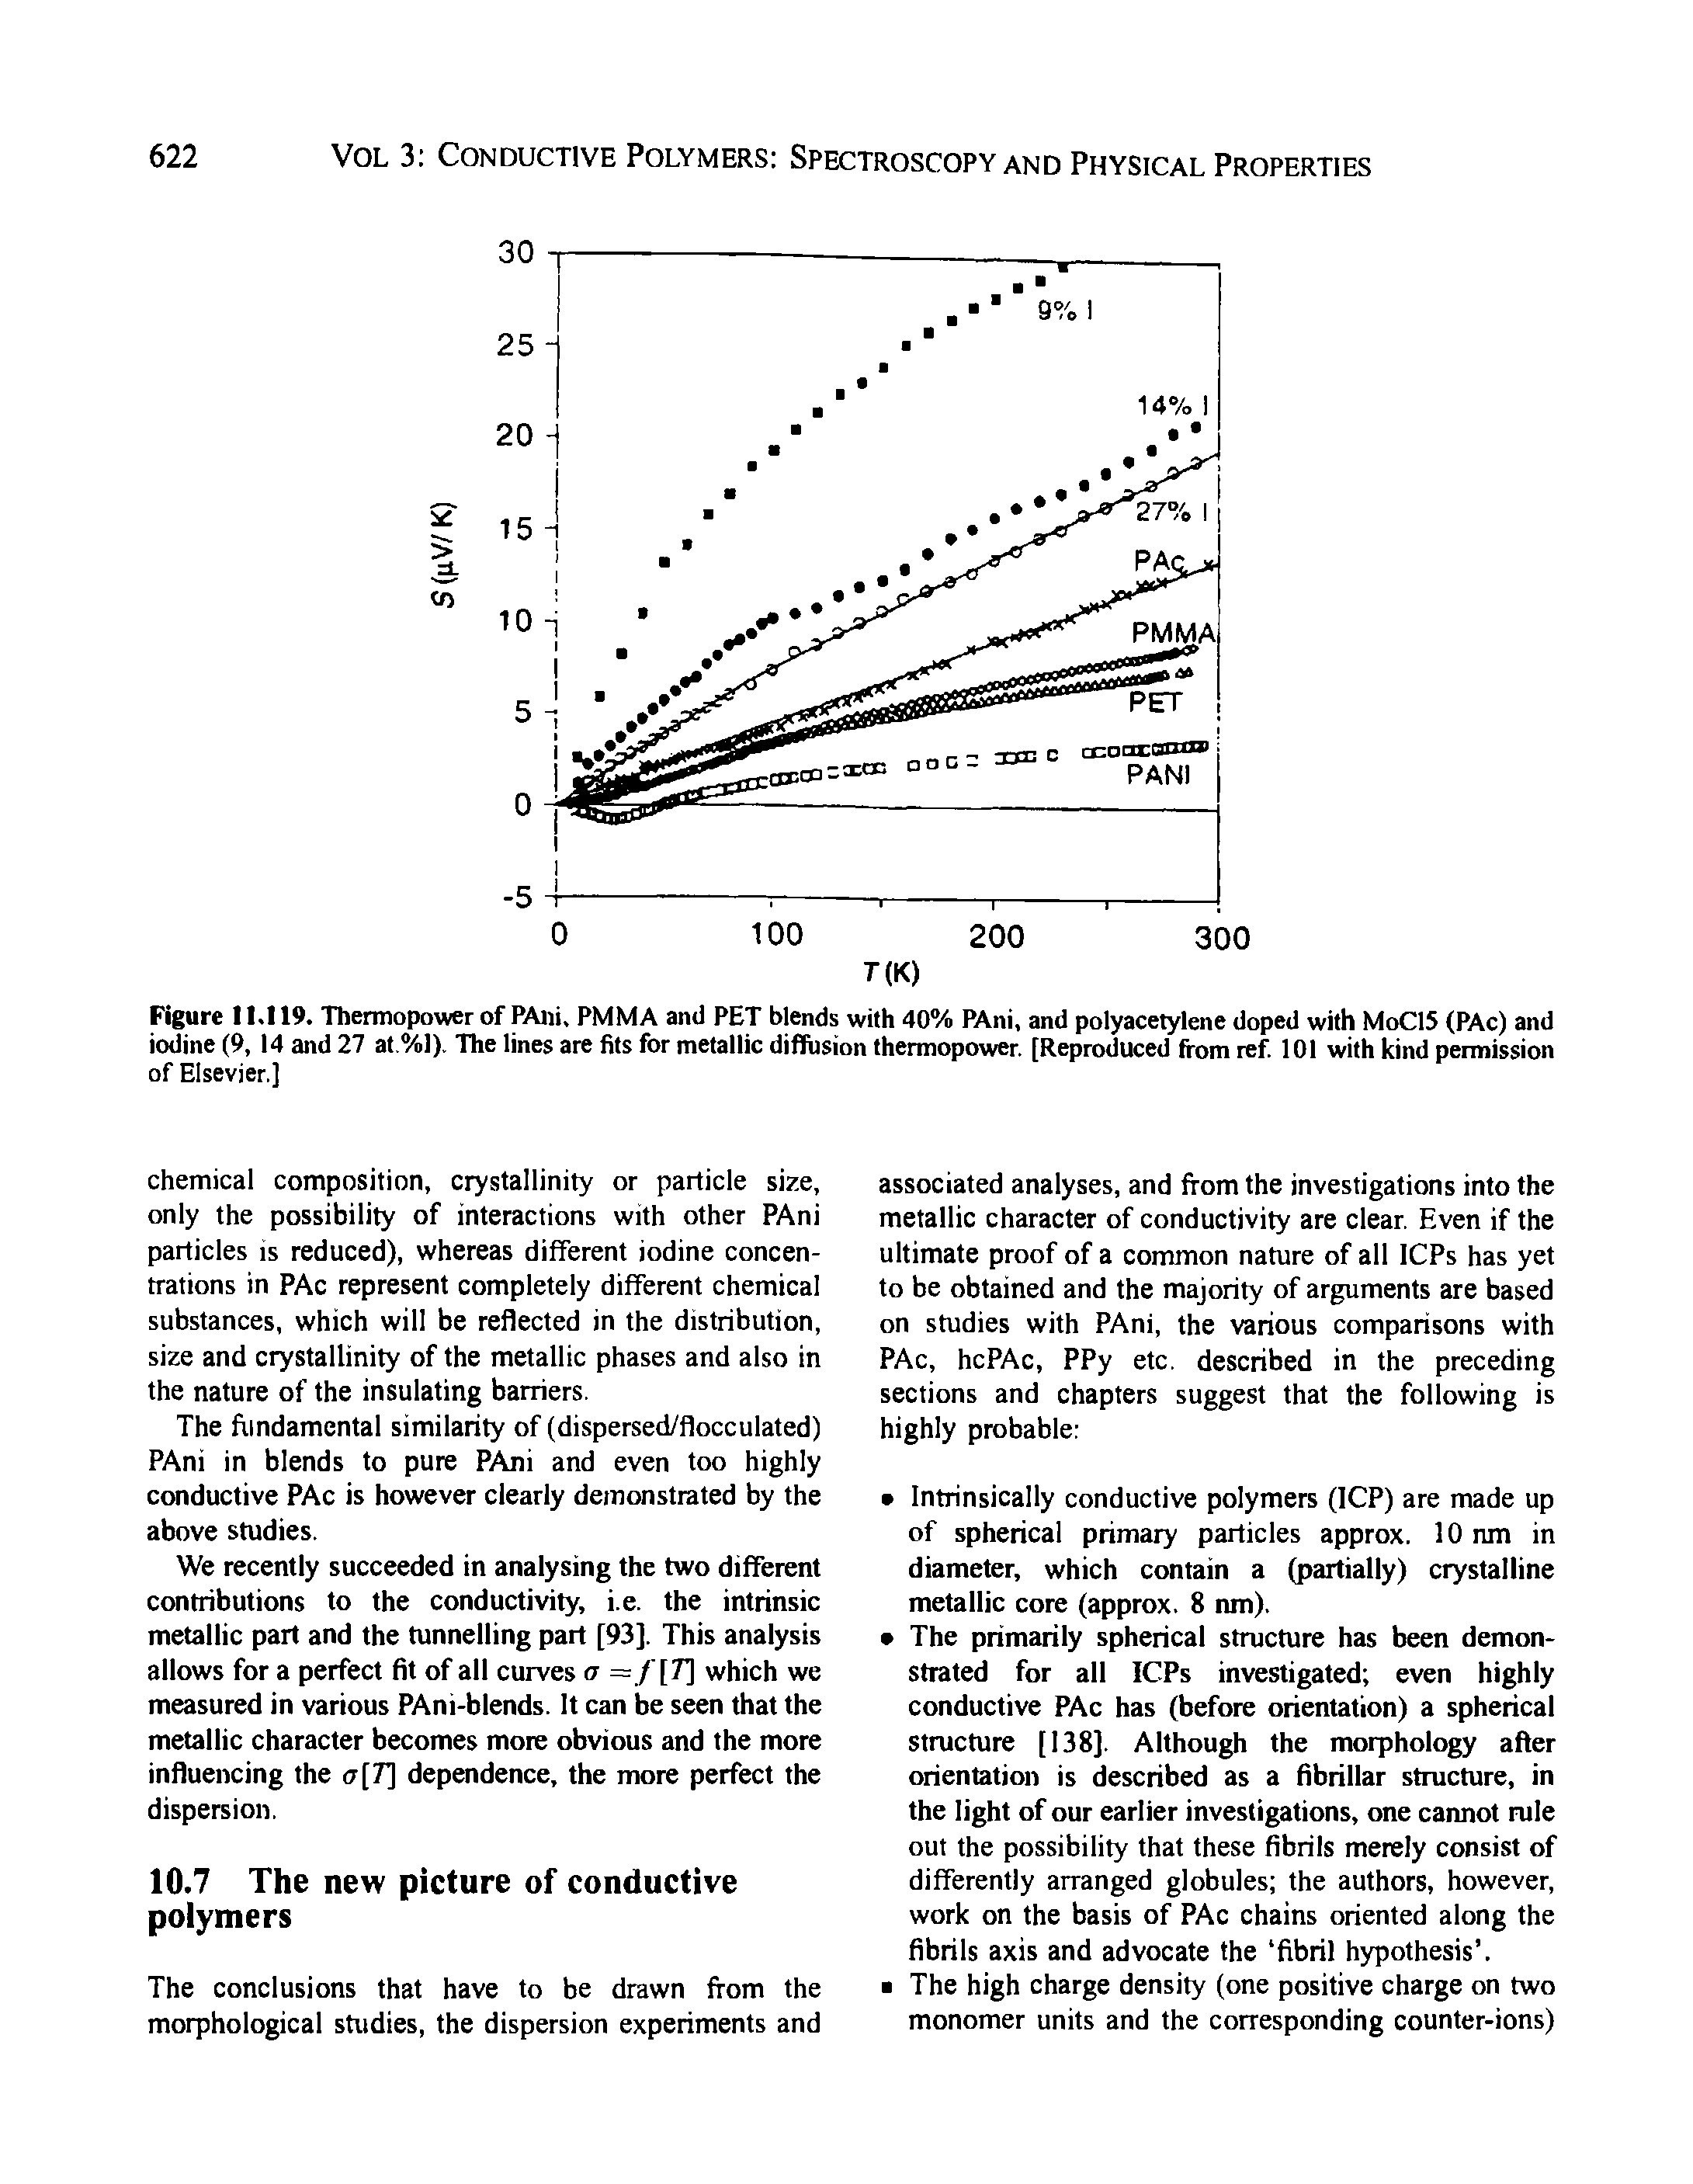 Figure 11.119. Thermopower of PAiii, PMMA and PET blends with 40% PAni, and polyacetylene doped with MoClS (PAc) and iodine (9, 14 and 27 al.%1). The lines are fils for metallic difFusion thermopower. [Reproduced from ref 101 with kind permission of Elsevier.]...